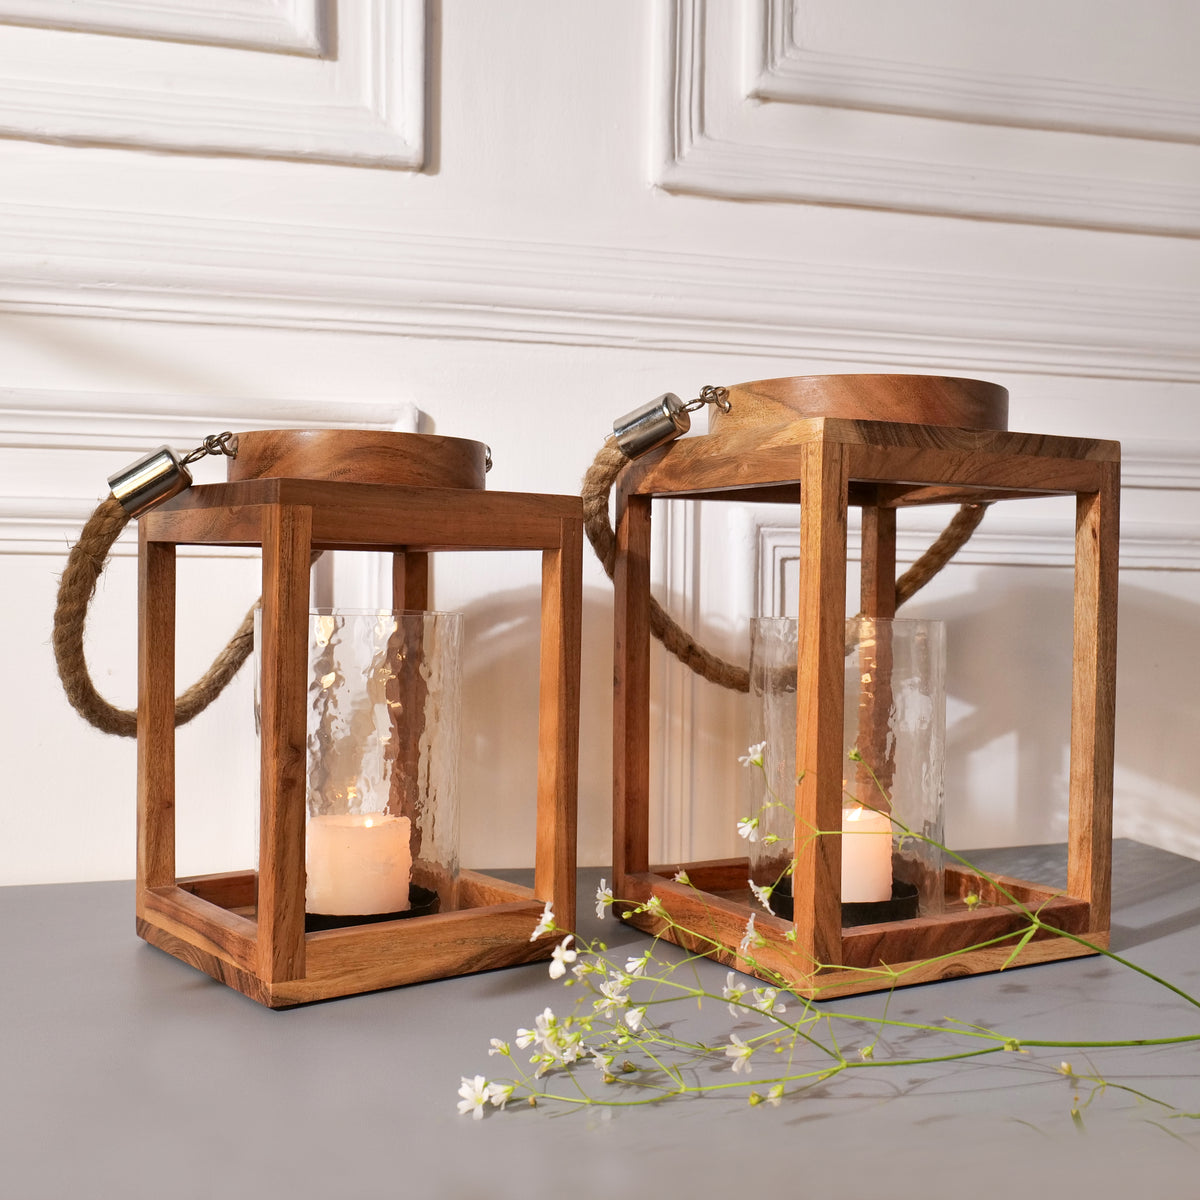 Rustic Glow: Handcrafted Wooden Lantern Set of 2